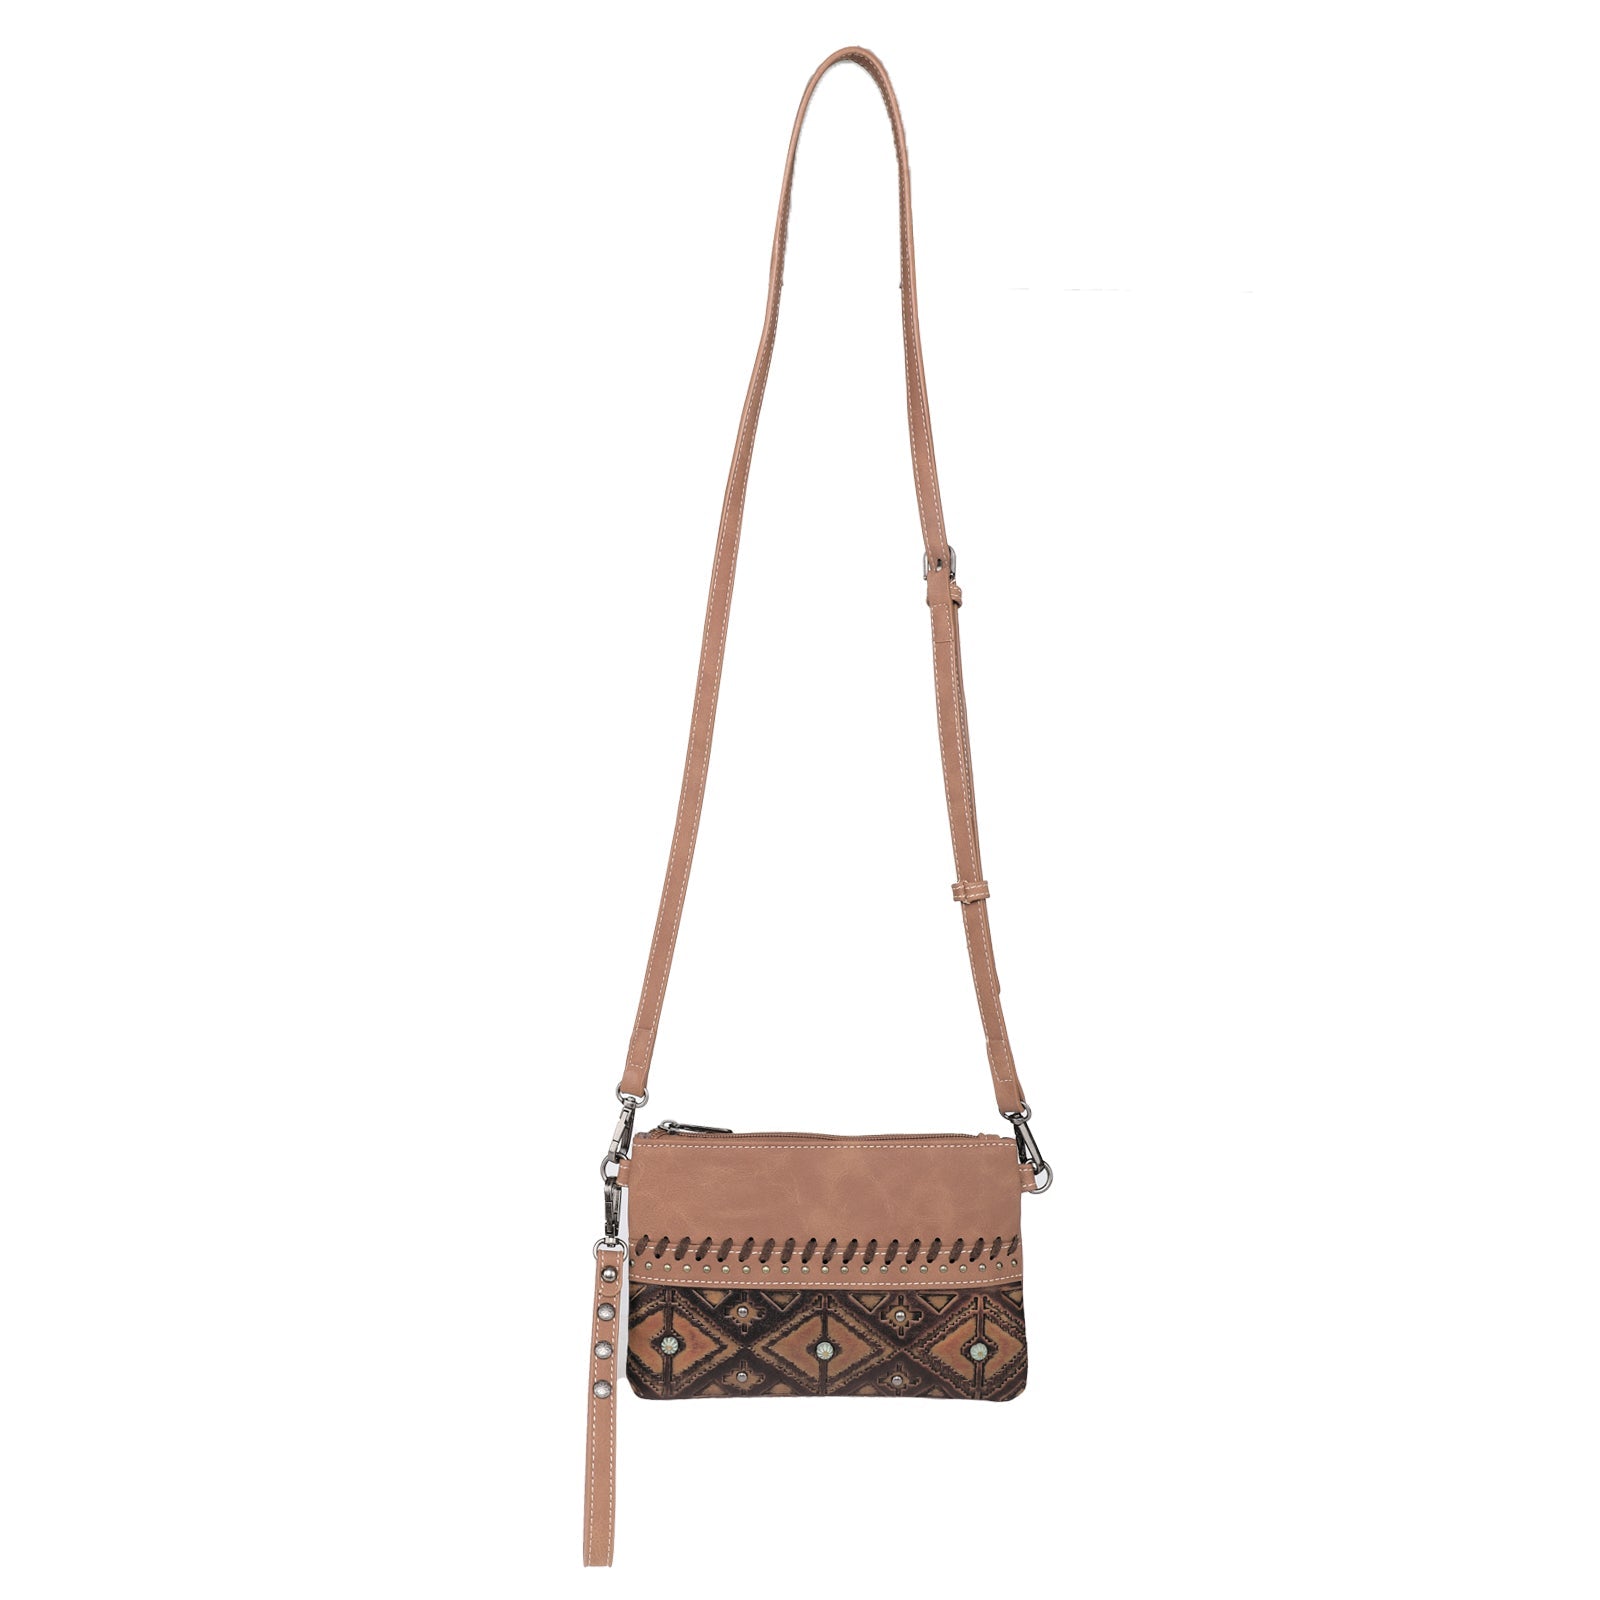 Montana West Aztec Collection Clutch/Crossbody - Cowgirl Wear